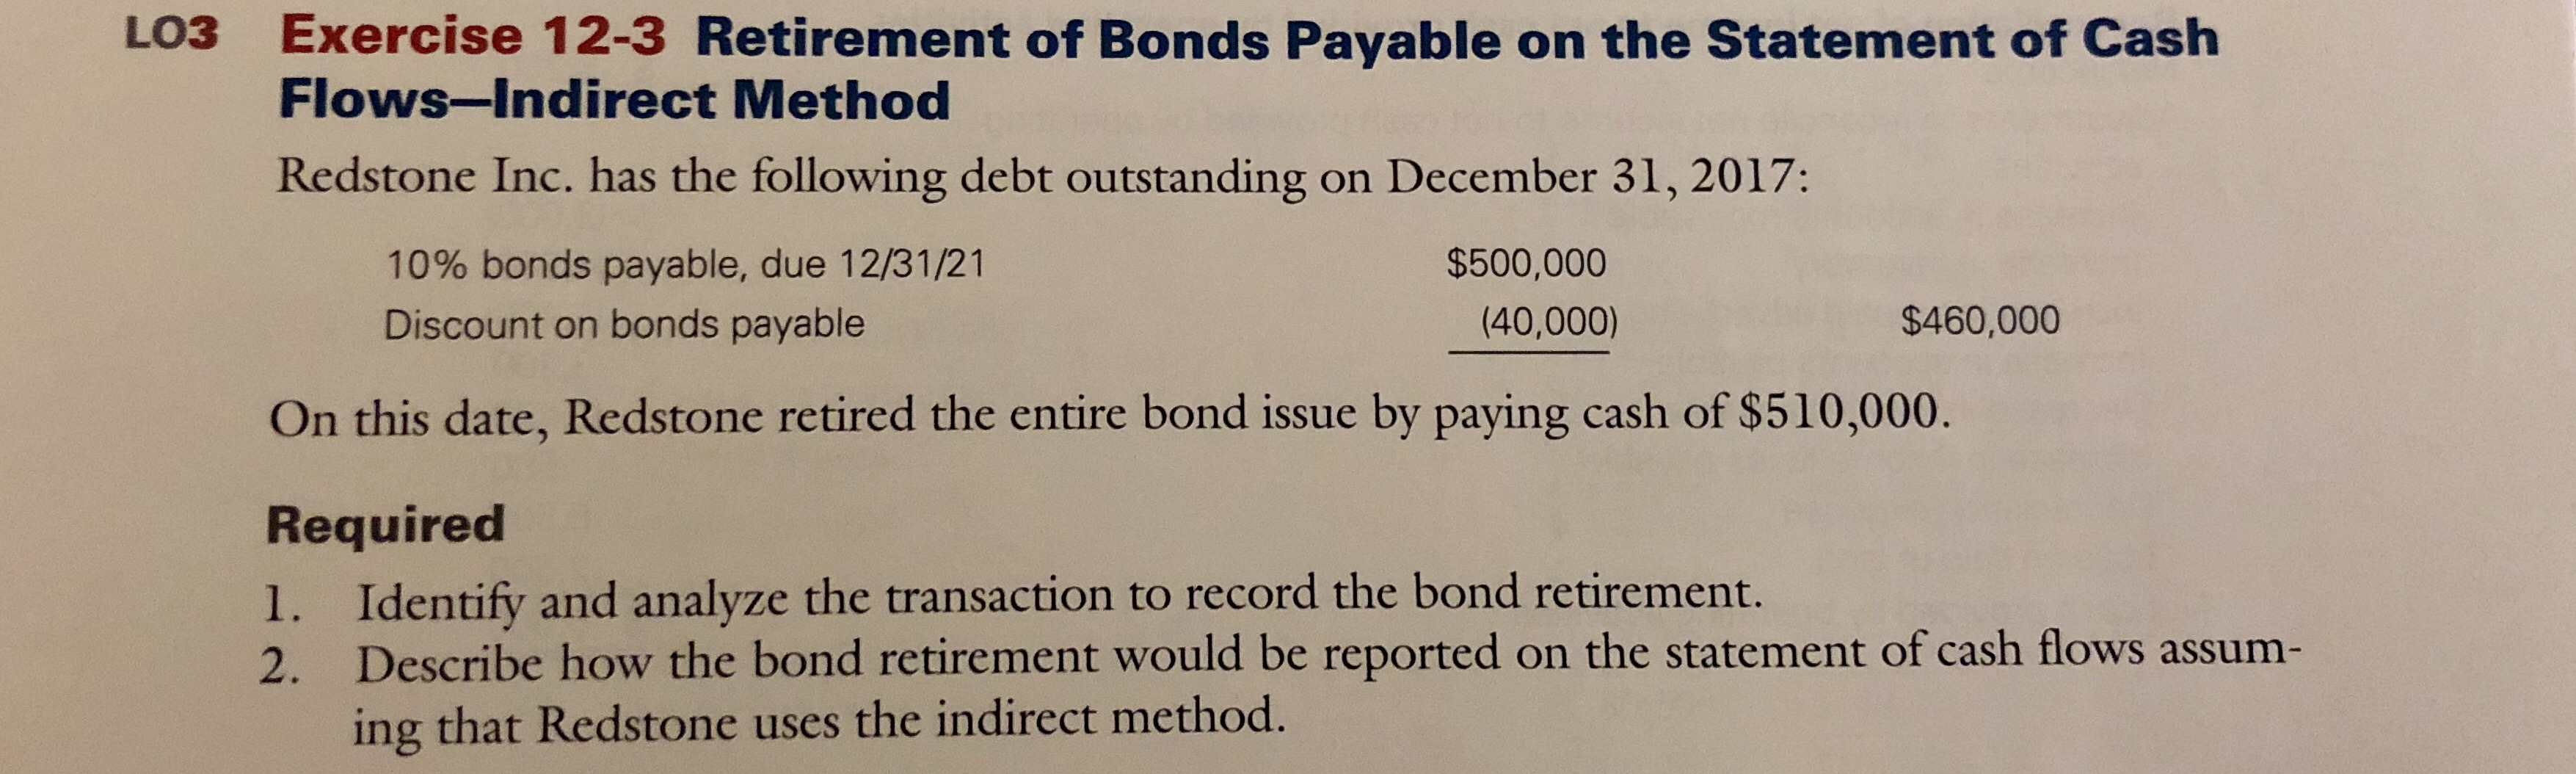 Exercise 12-3 Retirement of Bonds Payable on the Statement of Cash
Flows-Indirect Method
LO3
Redstone Inc. has the following debt outstanding on December 31, 2017:
10% bonds payable, due 12/31/21
Discount on bonds payable
$500,000
(40,000)
$460,000
On this date, Redstone retired the entire bond issue by paying cash of $510,000.
Required
1. Identify and analyze the transaction to record the bond retirement.
2. Describe how the bond retirement would be reported on the statement of cash flows assum-
ing that Redstone uses the indirect method.
